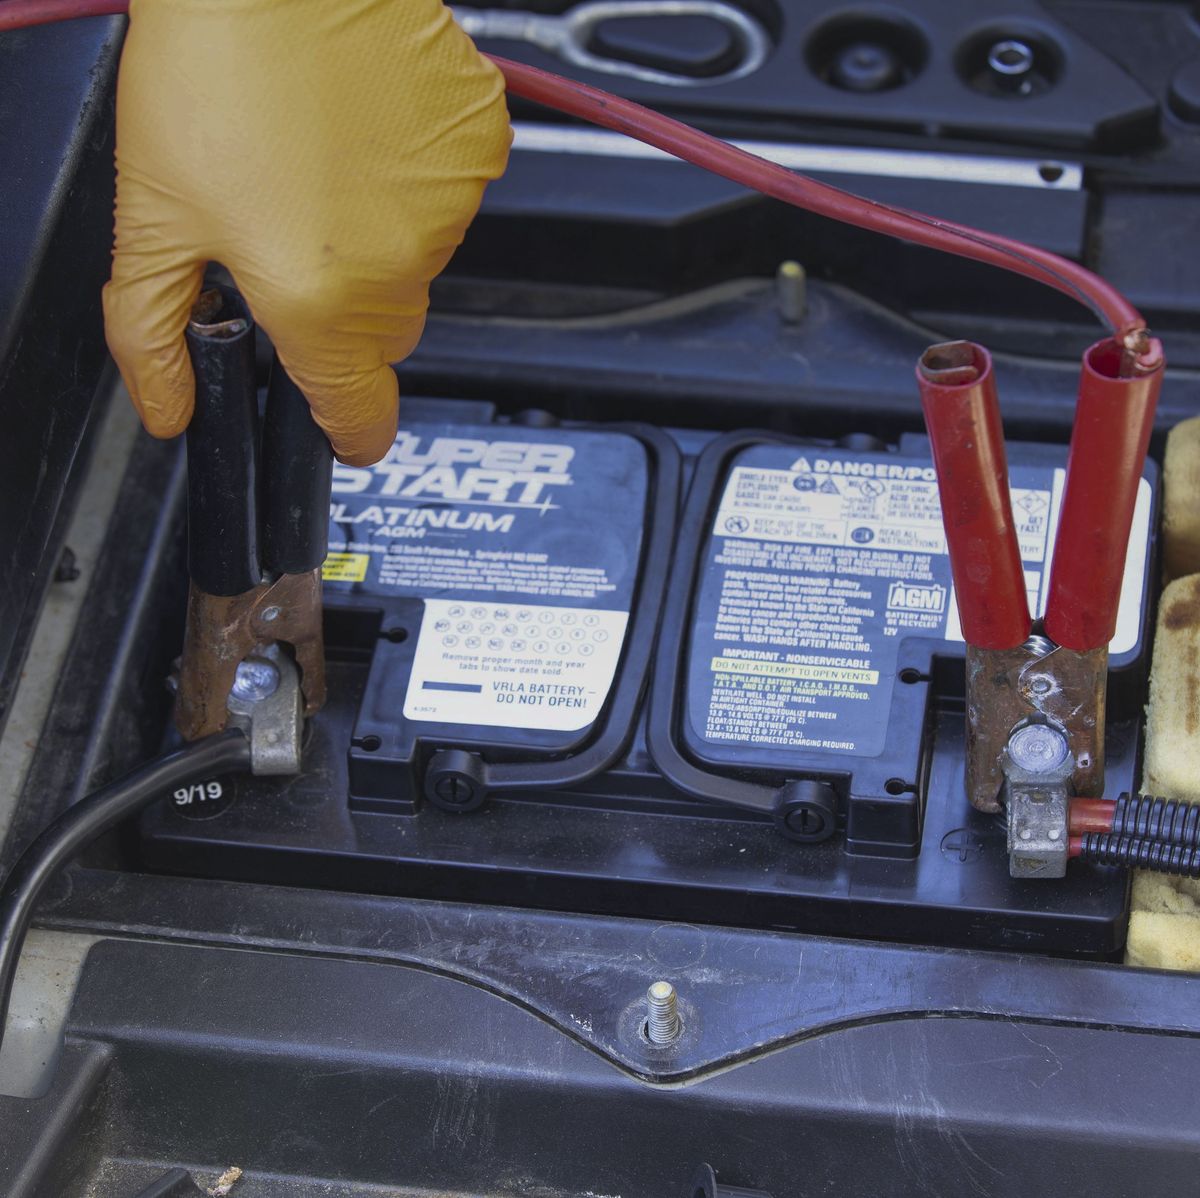 How to Jump Start a Car - Step-By-Step Guide